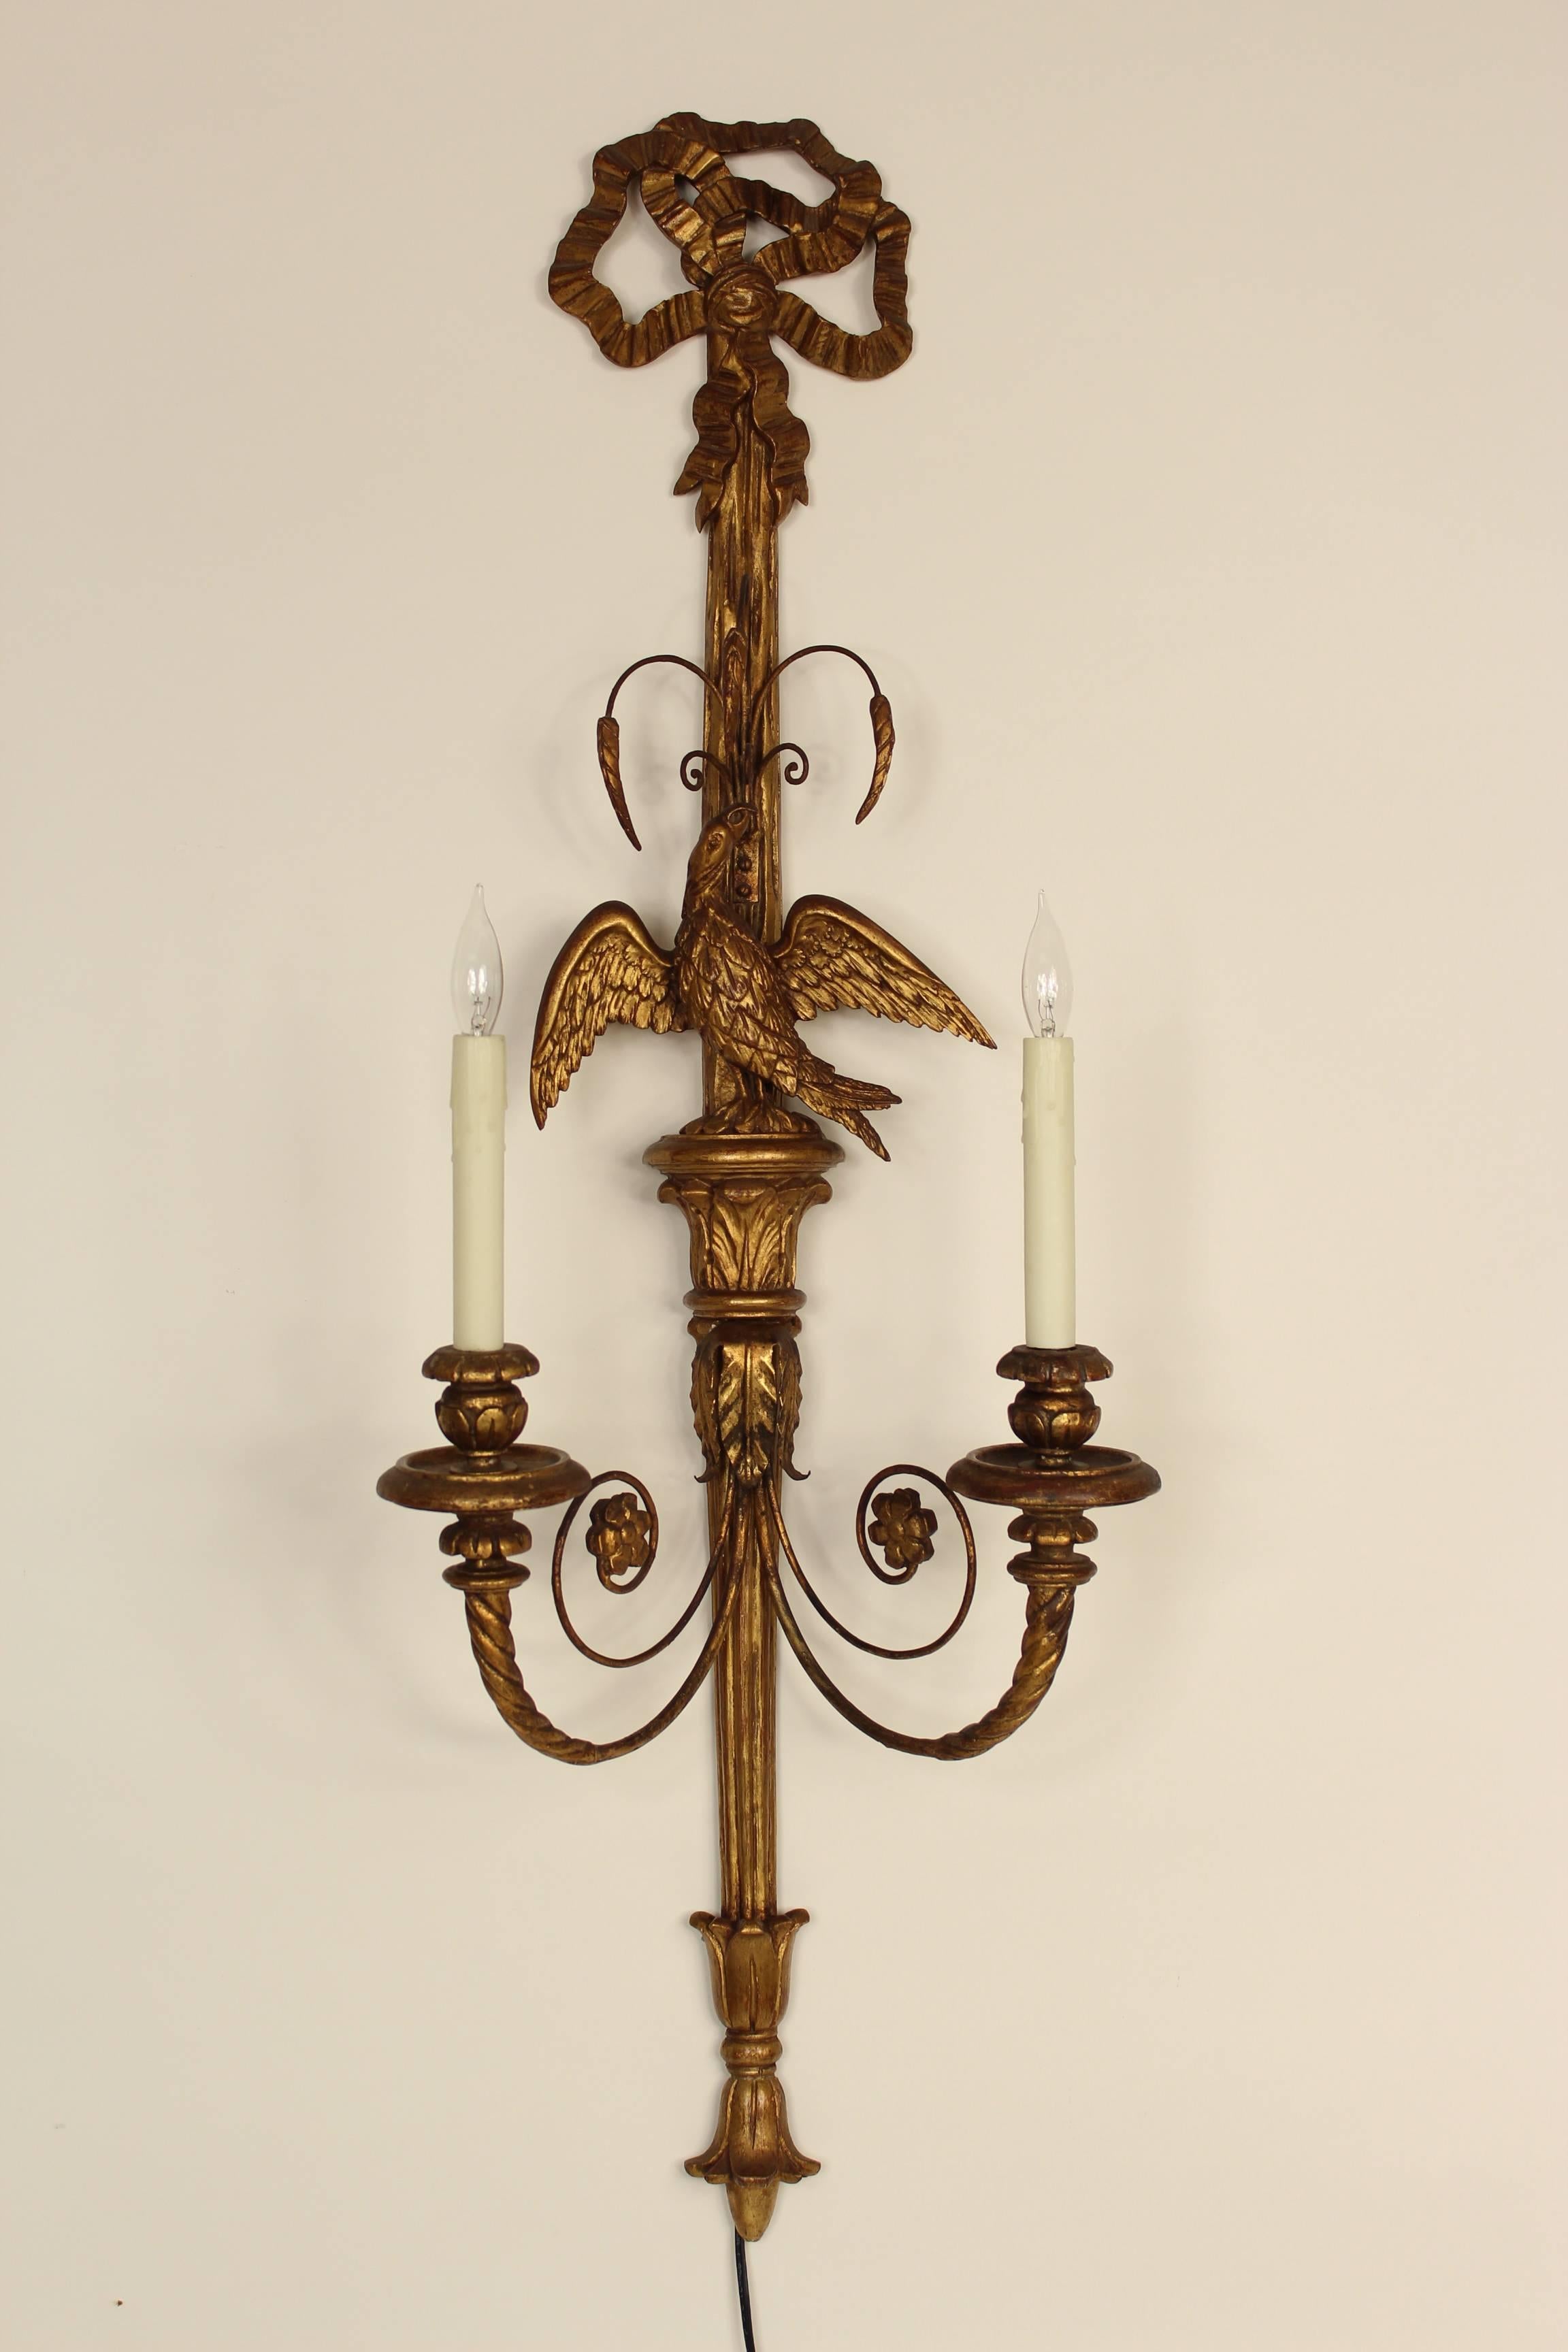 Pair of Italian neoclassical style giltwood wall sconces, mid-20th century. This is a nice large pair of wall sconces with carved eagles.